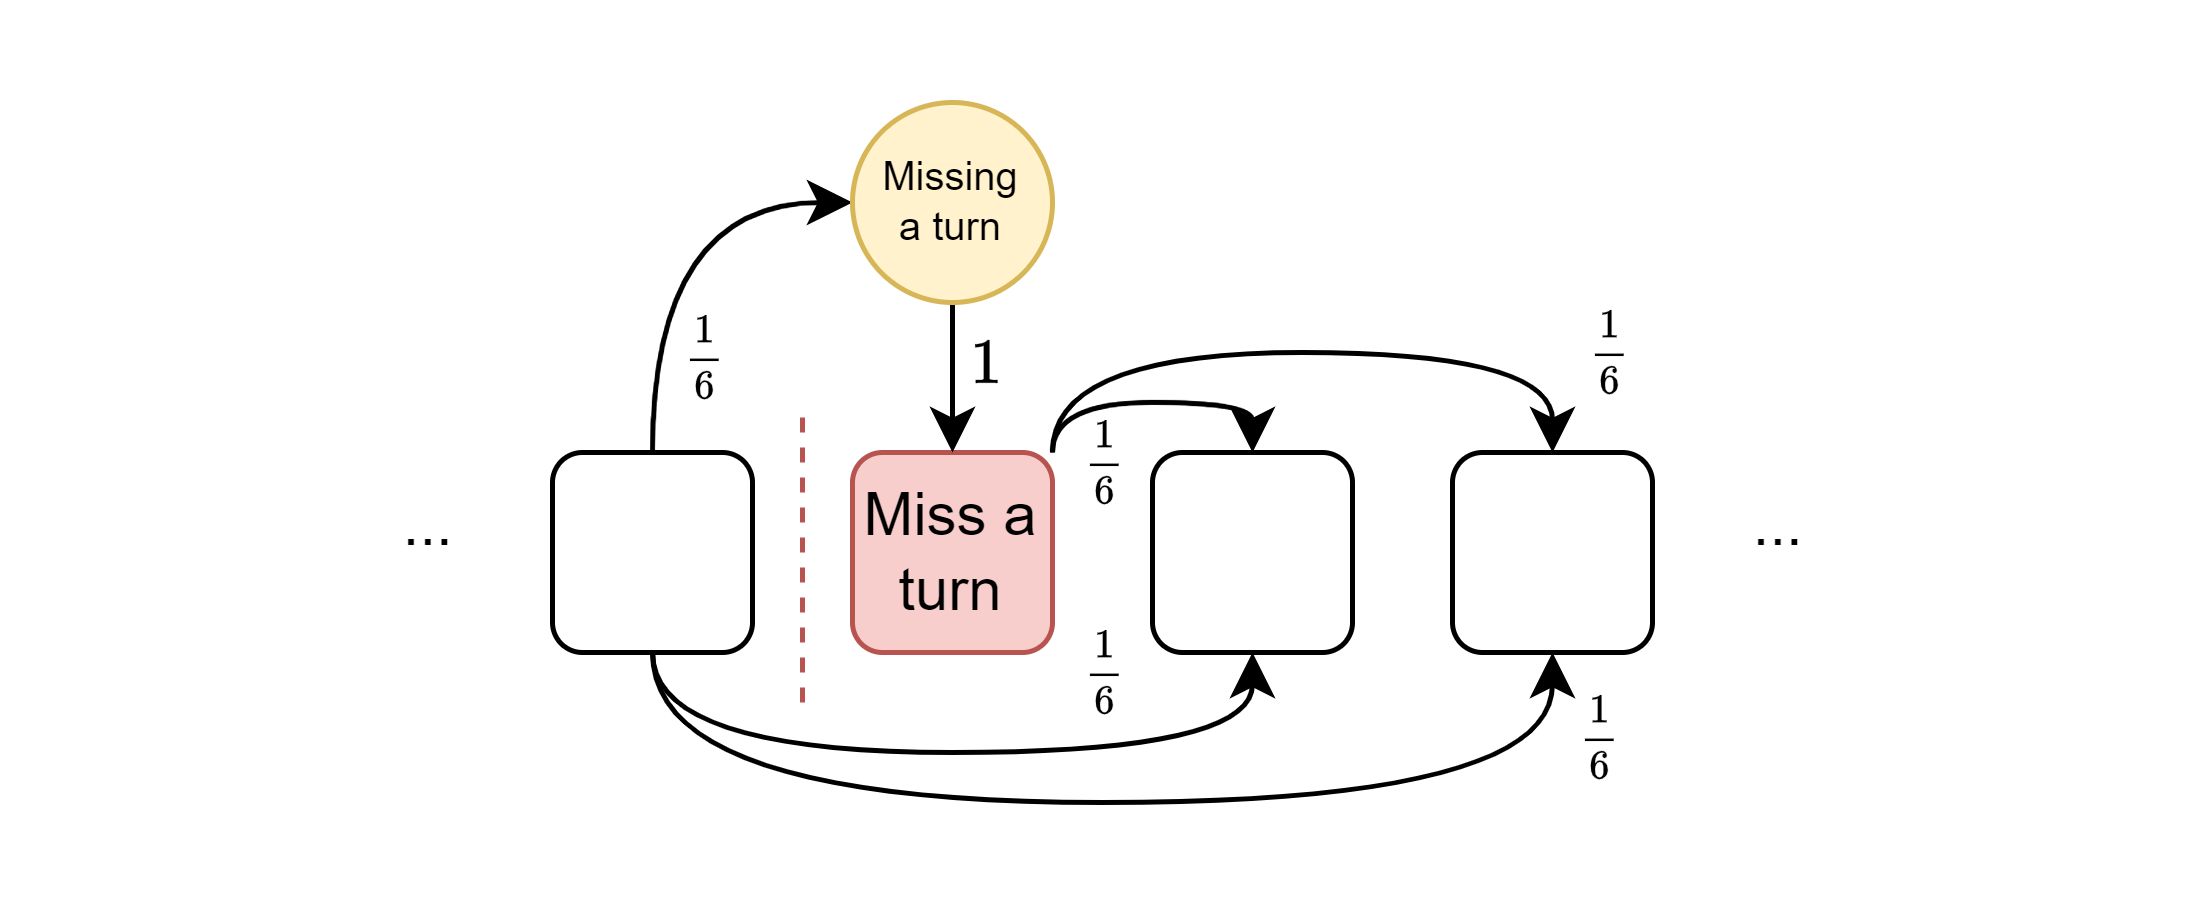 Diagram showing the “missing a turn” state